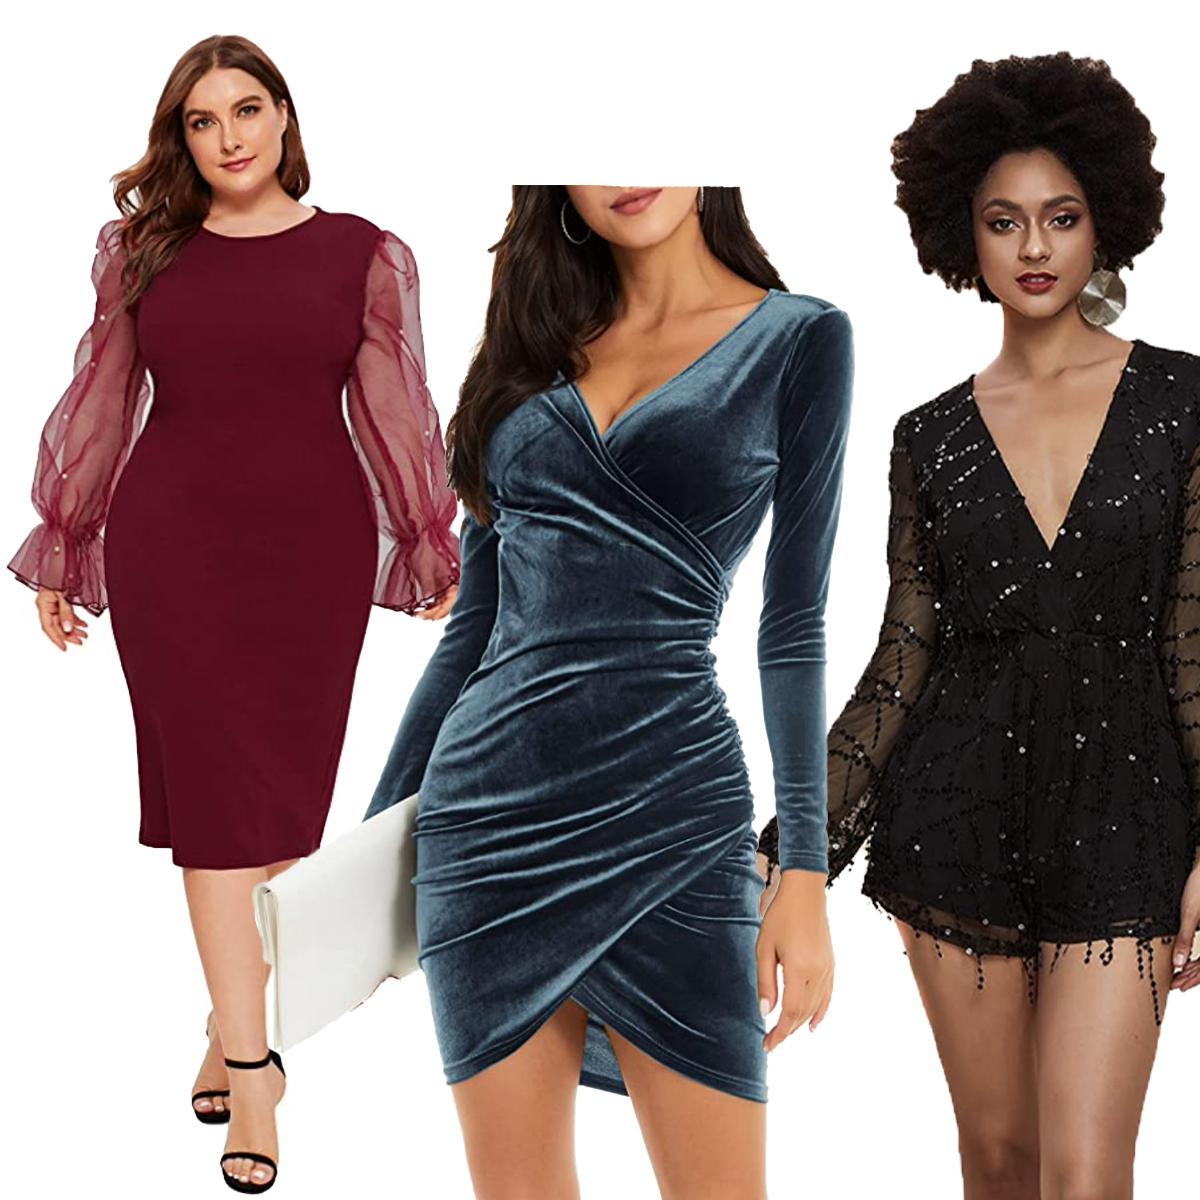 16 New Year's Eve Dresses You Won't Believe Are From Amazon